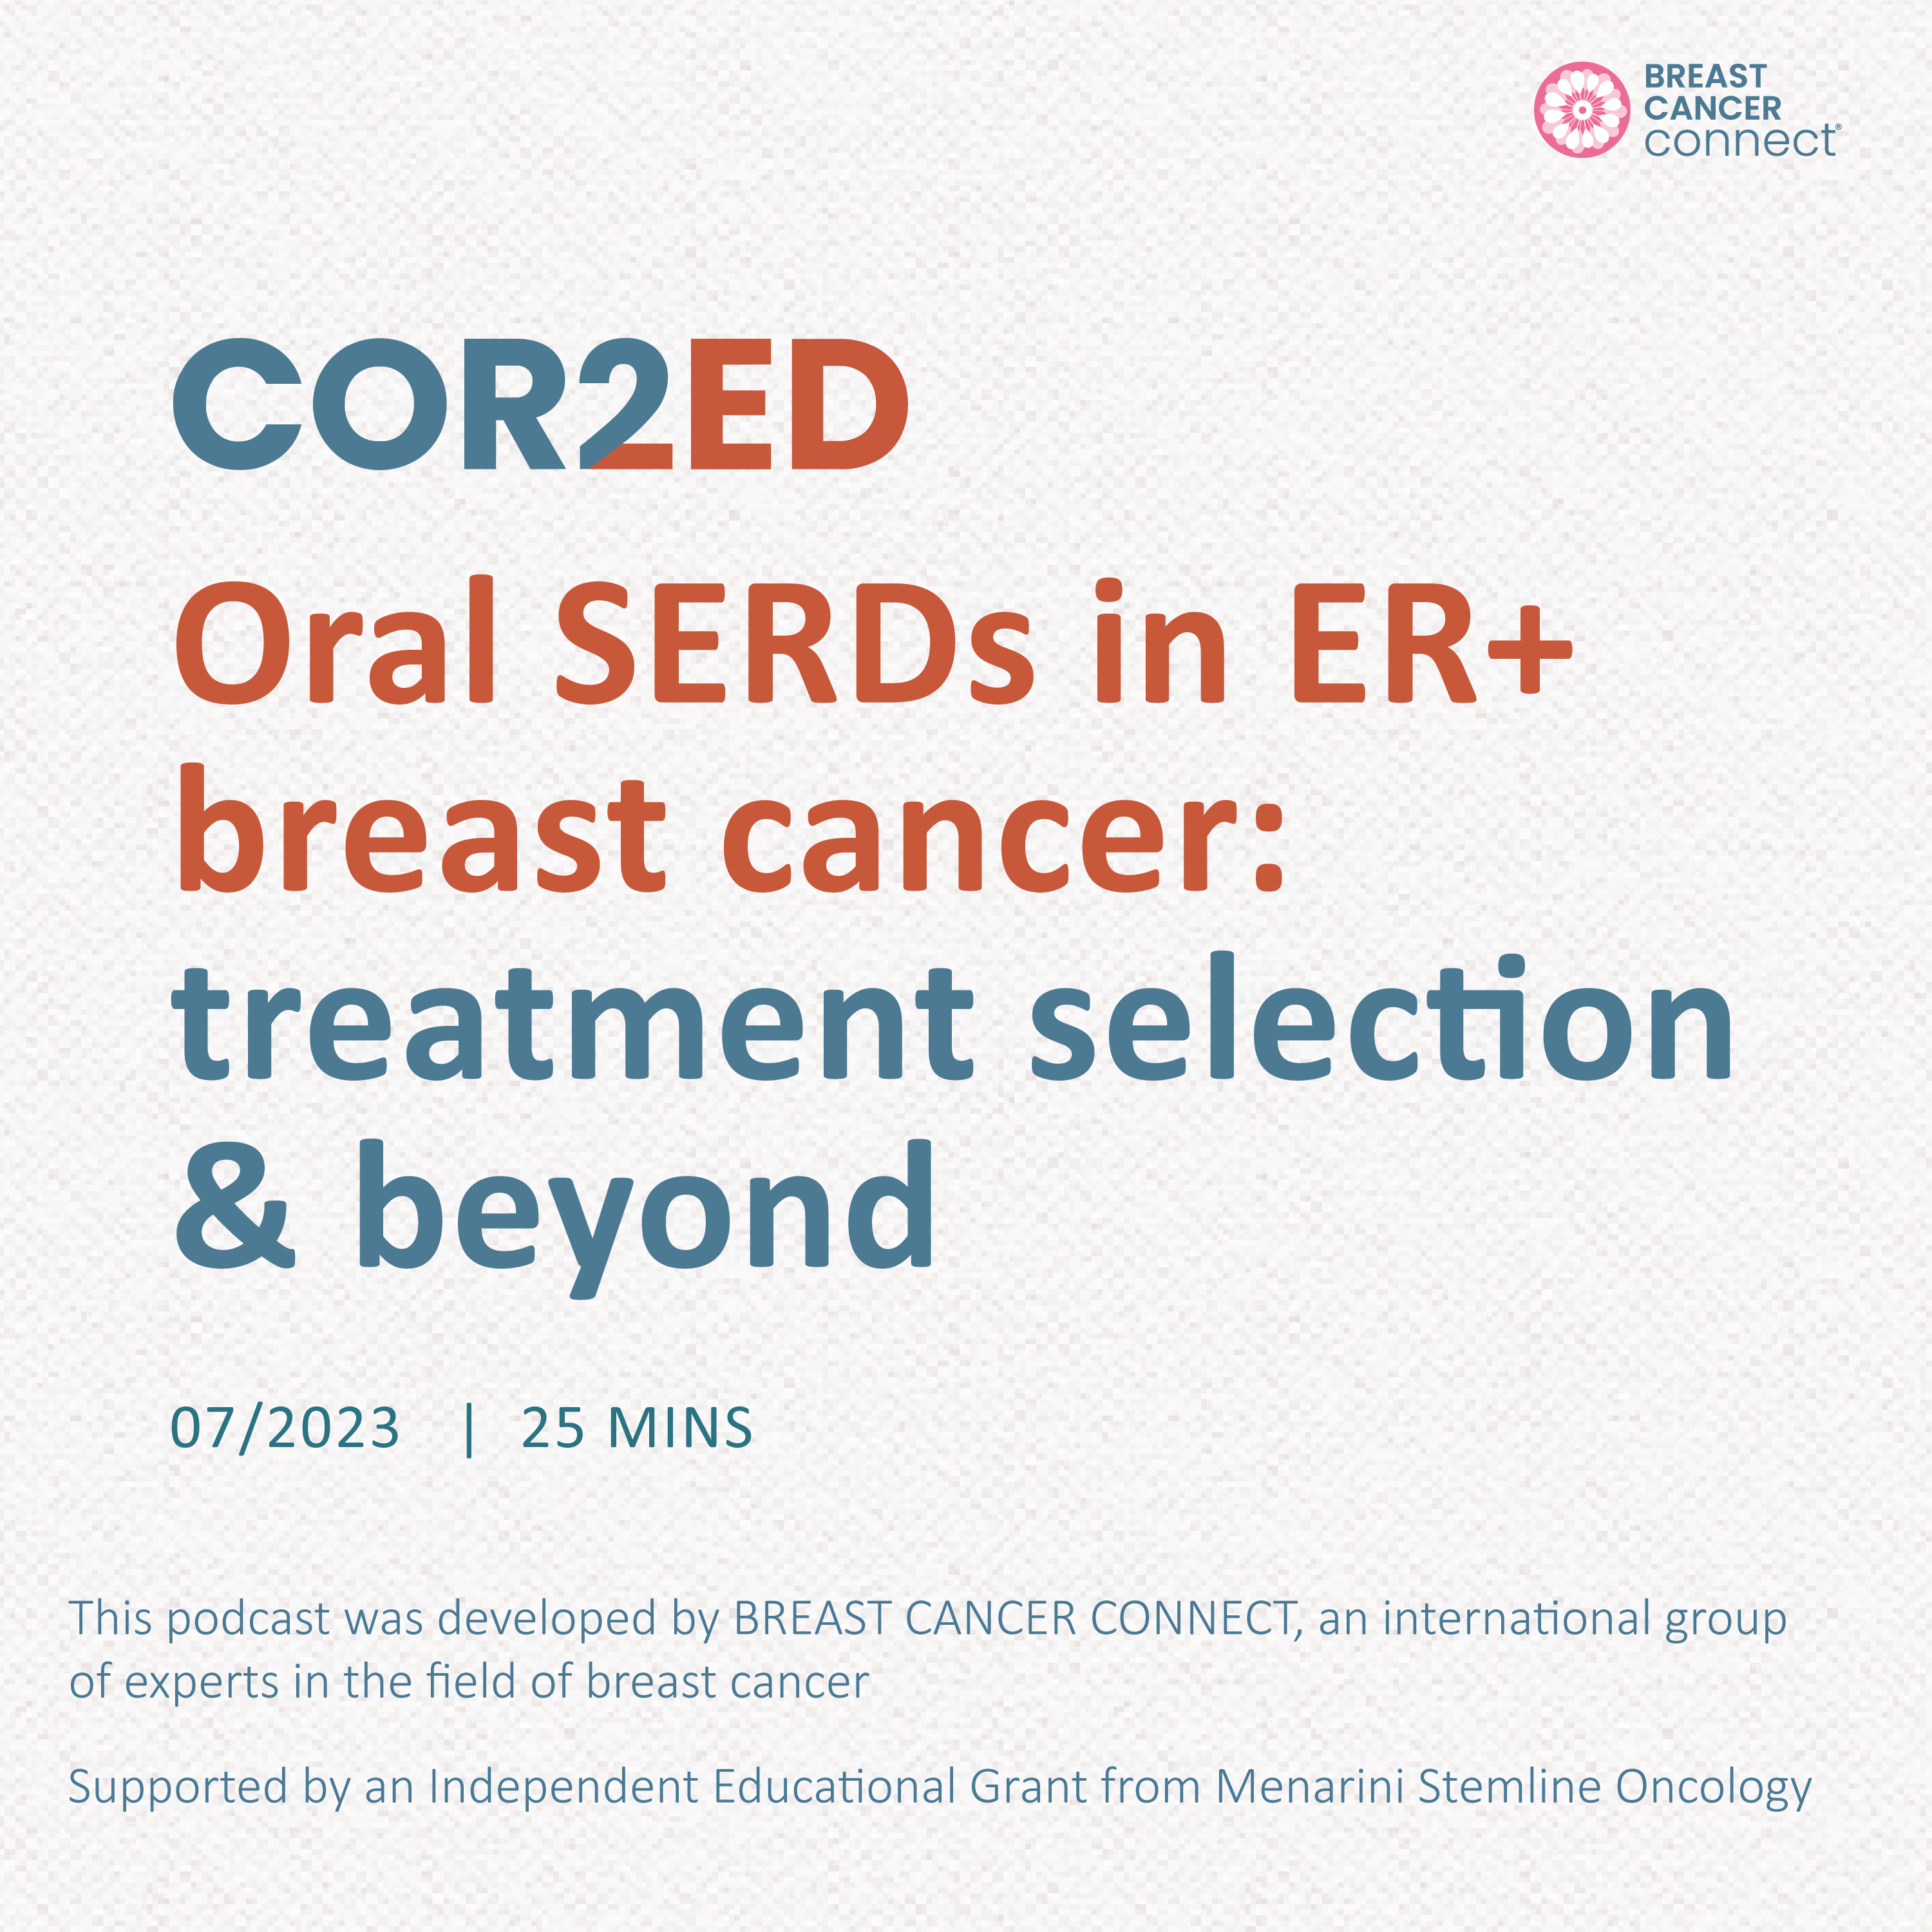 Breast Cancer: Oral SERDs in ER+ breast cancer. Episode 2 - treatment selection and beyond